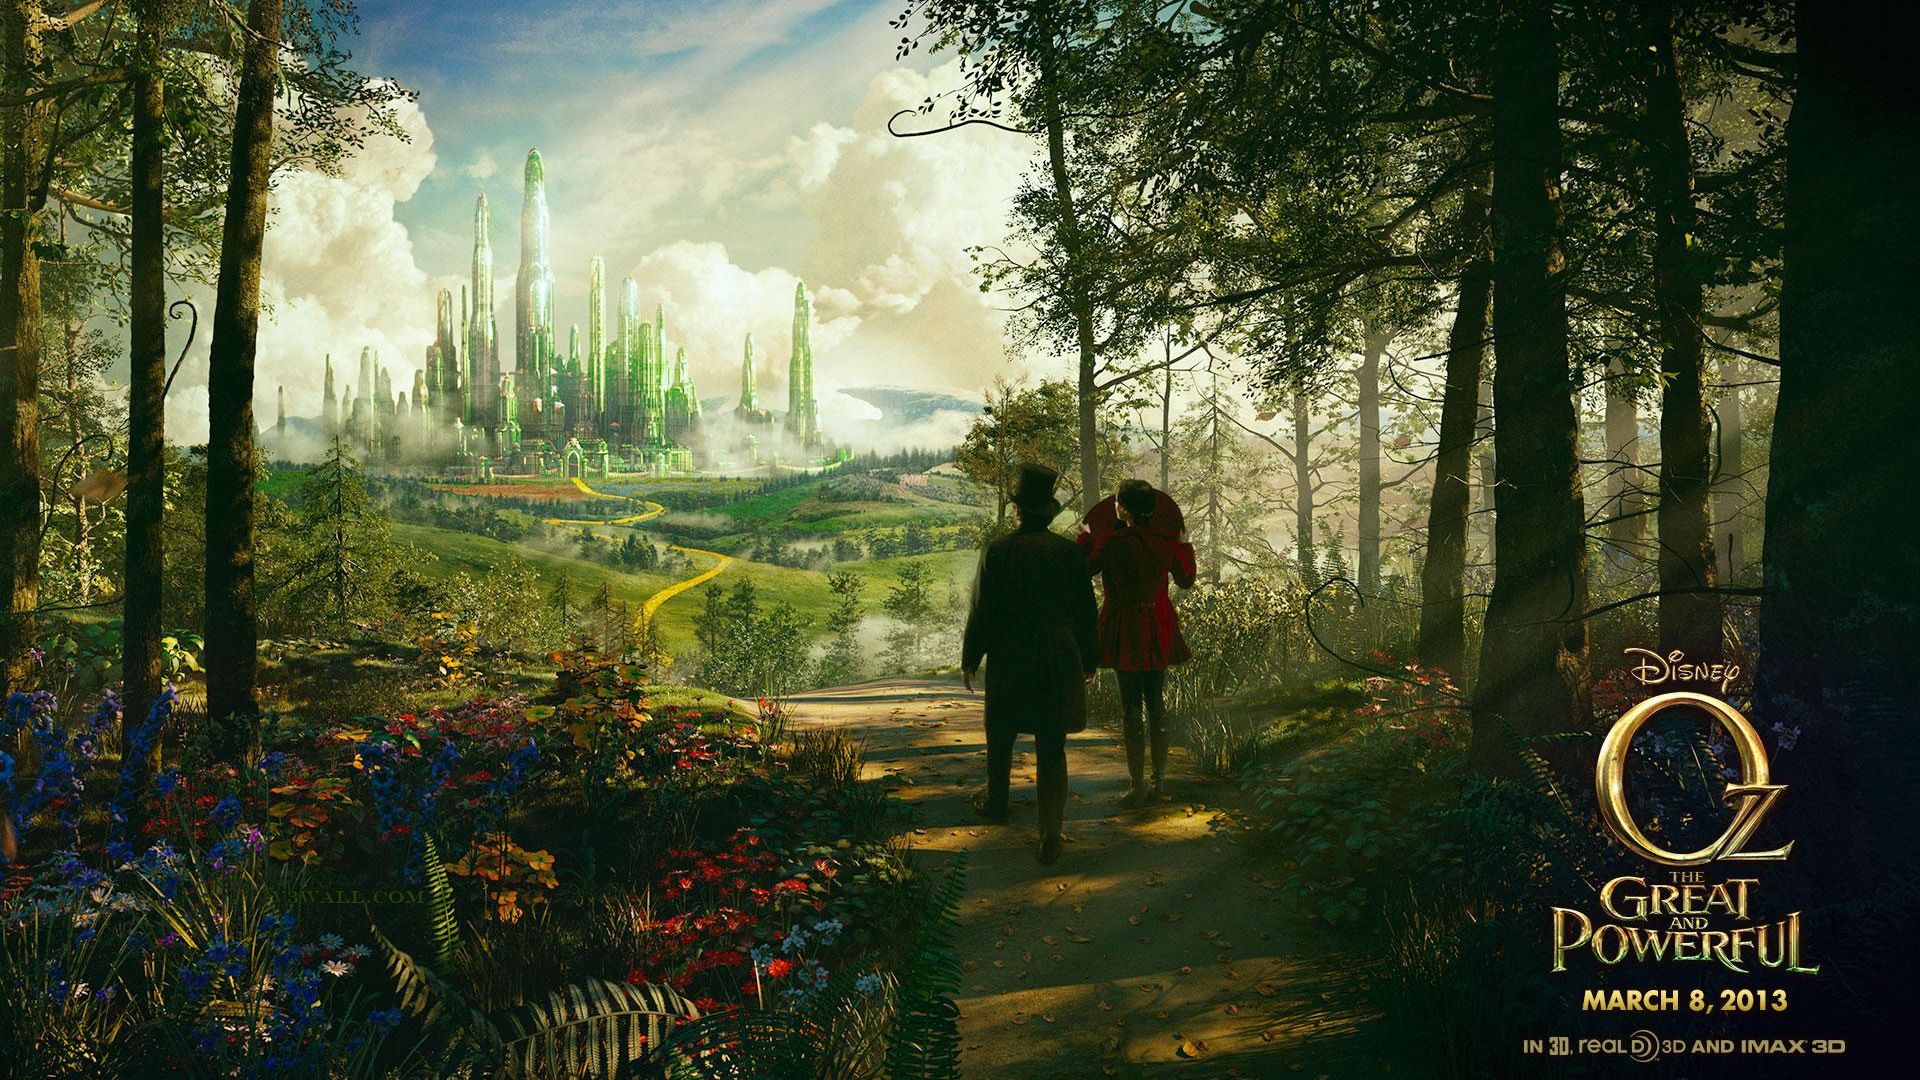 Oz The Great and Powerful 绿野仙踪 高清壁纸11 - 1920x1080